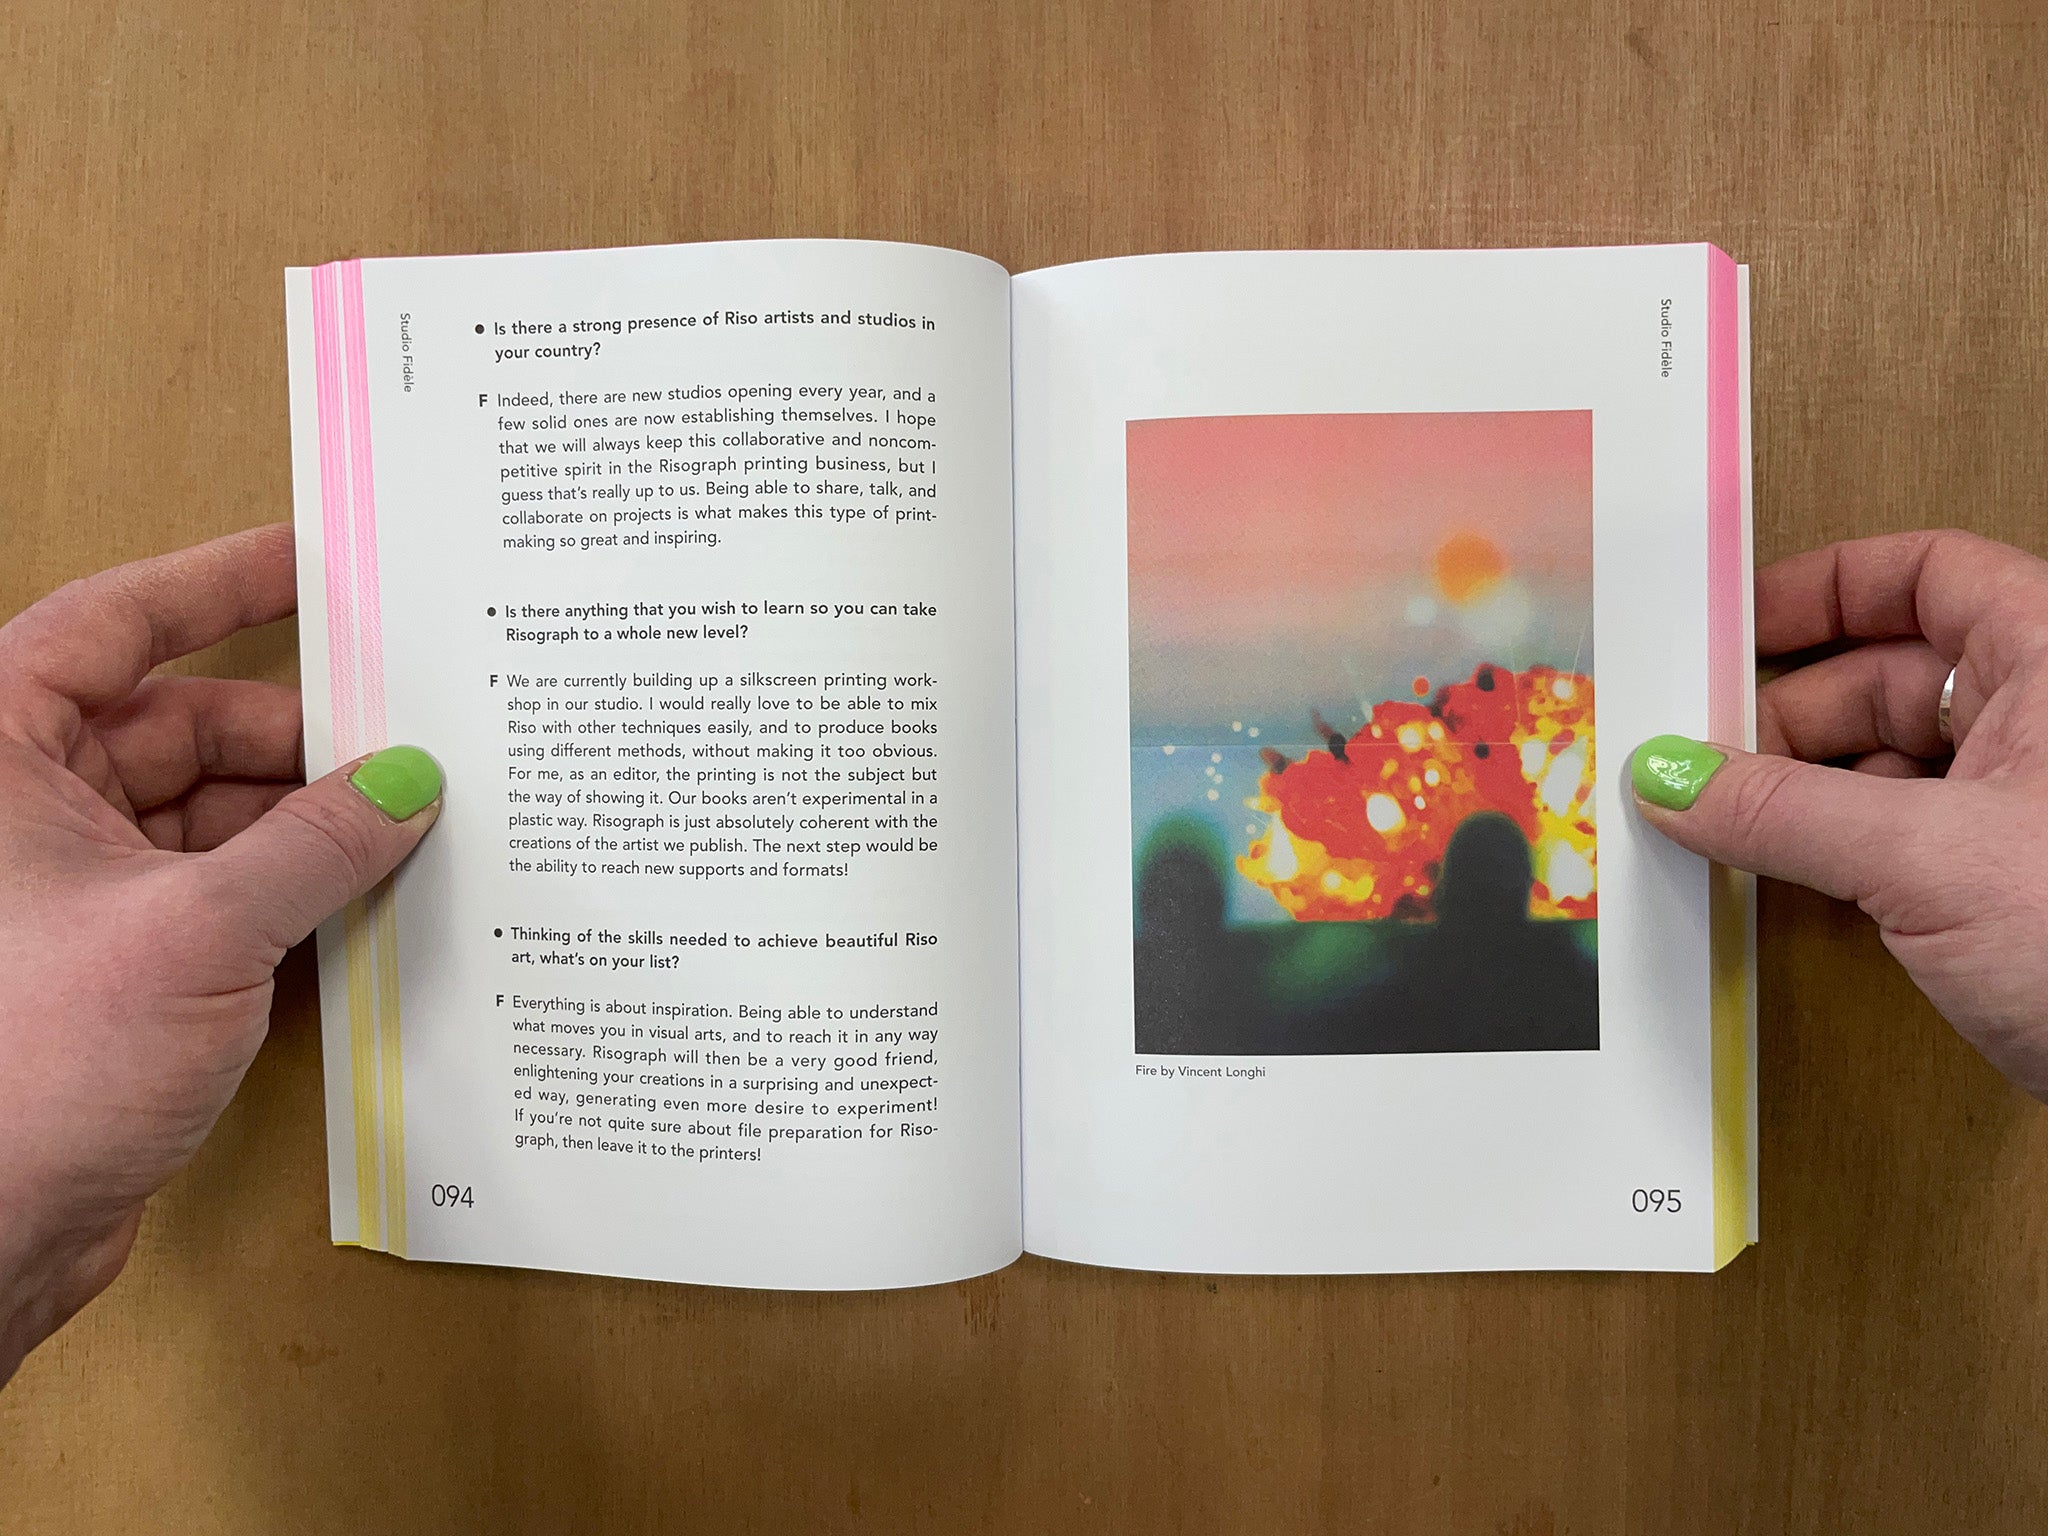 RISO ART: A CREATIVE'S GUIDE TO MASTERING RISOGRAPHY by Vivian Toh & Jay Lim